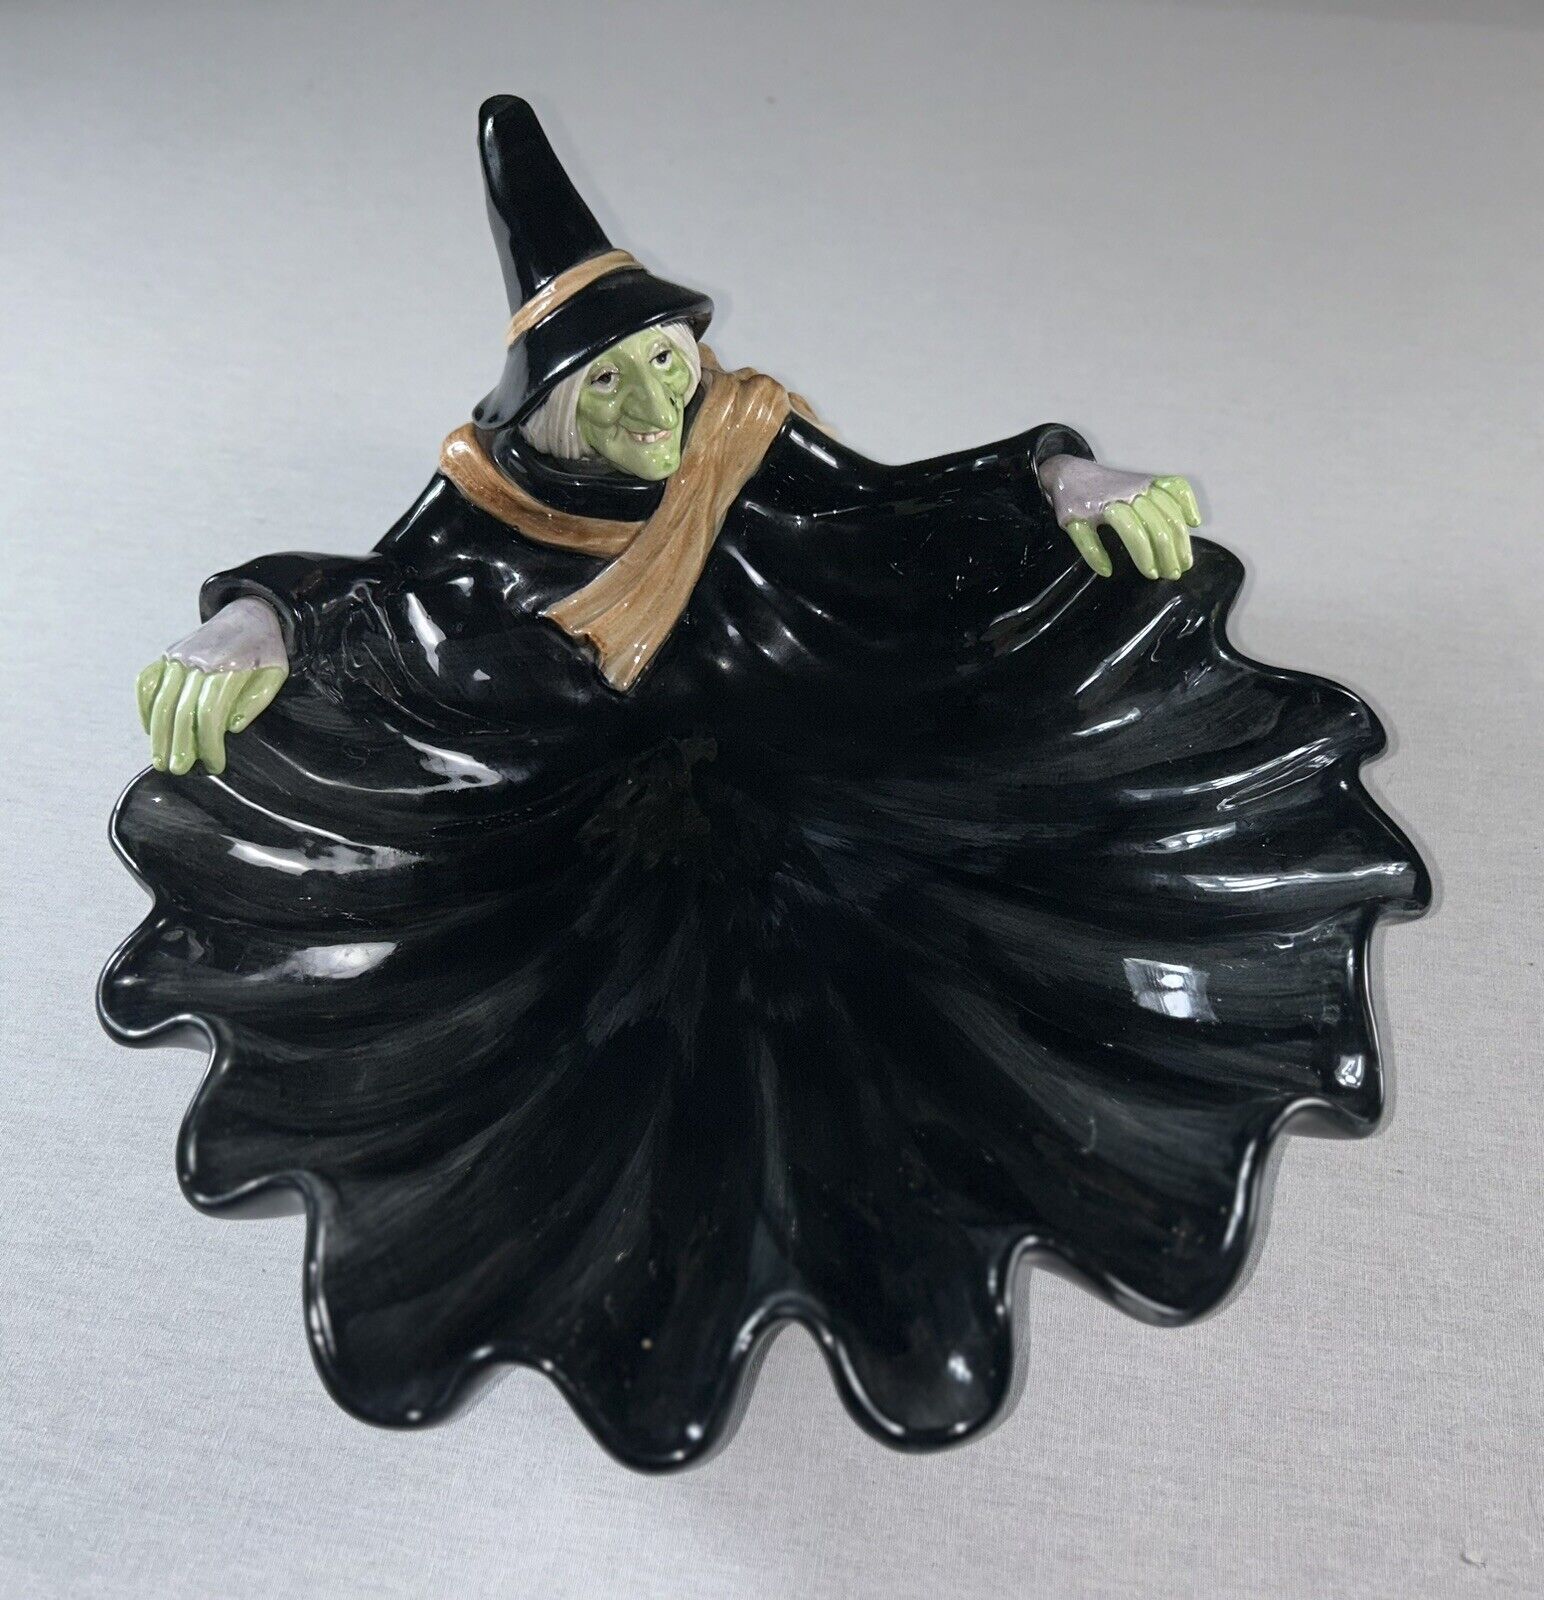 Vintage 1987 FITZ AND FLOYD Halloween Witch Candy Dish/Bowl